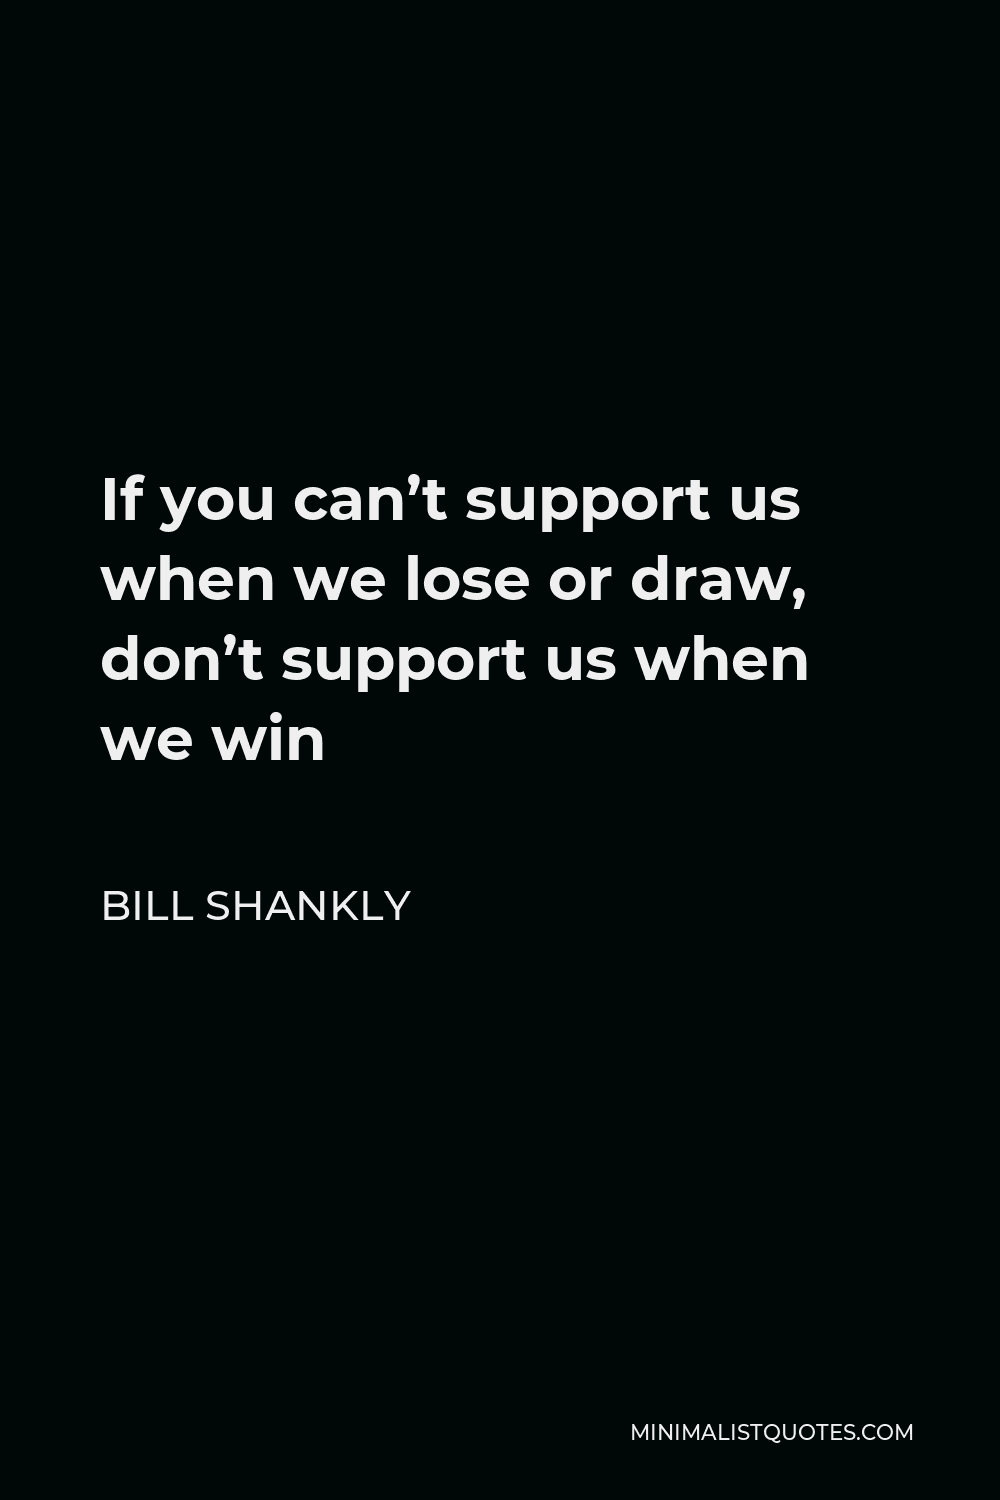 Bill Shankly Quote - If you can’t support us when we lose or draw, don’t support us when we win